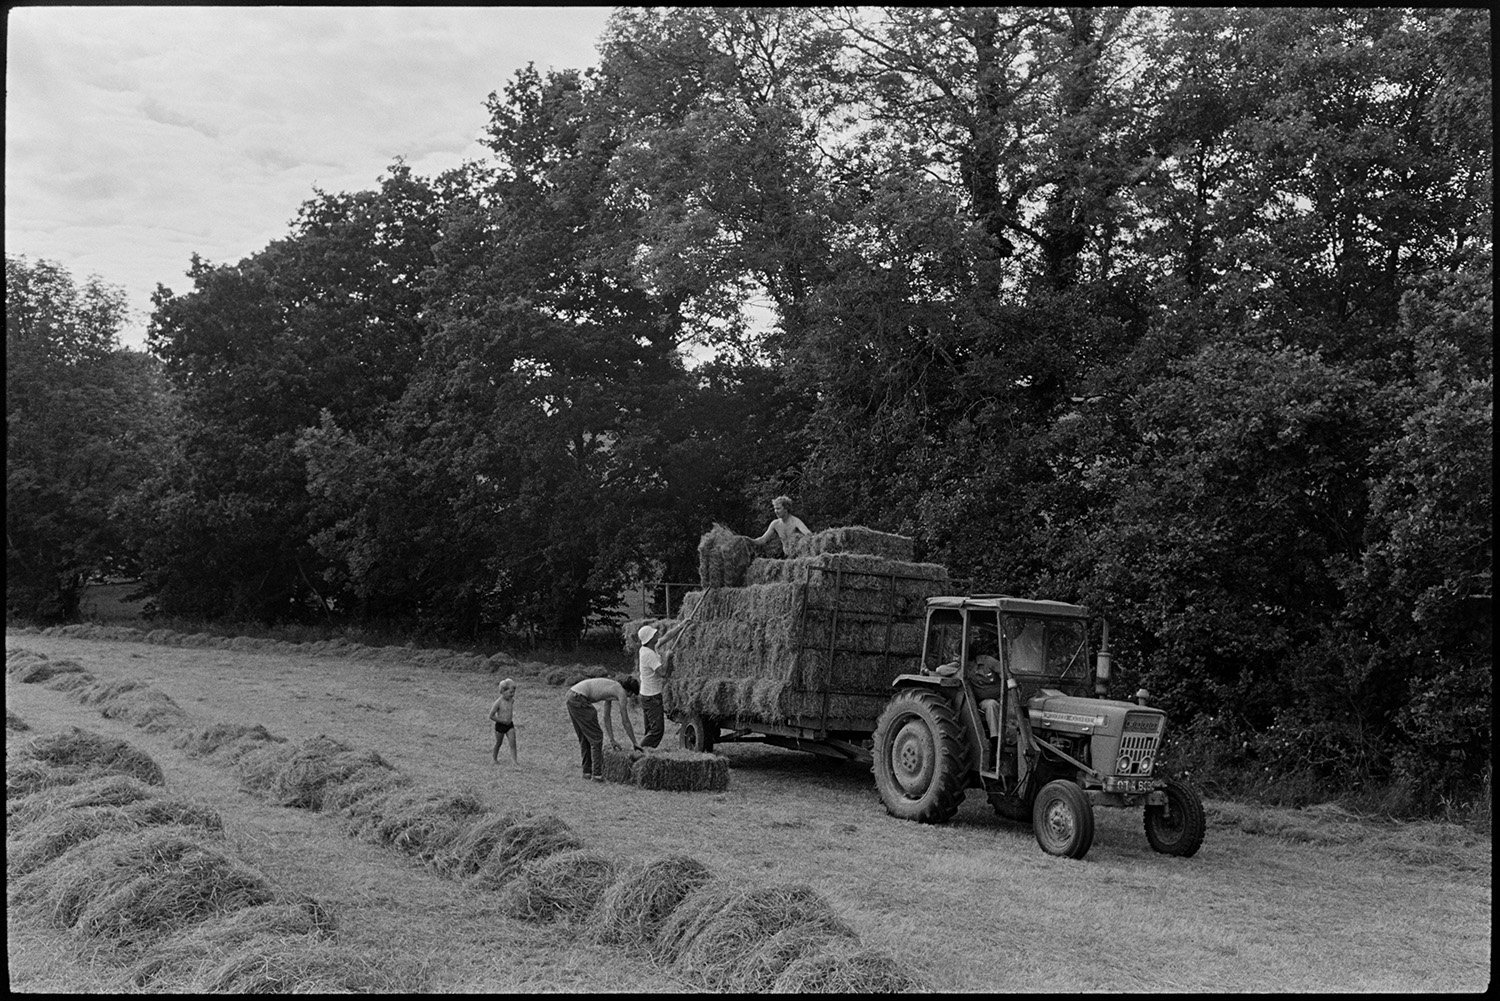 Haymaking loading bales. 
[A group of men and a young boy loading hay bales onto a tractor and trailer in a  field above Millhams, Dolton. A row of tall trees can be seen behind them and piles of hay waiting to be baled is visible in the field.]